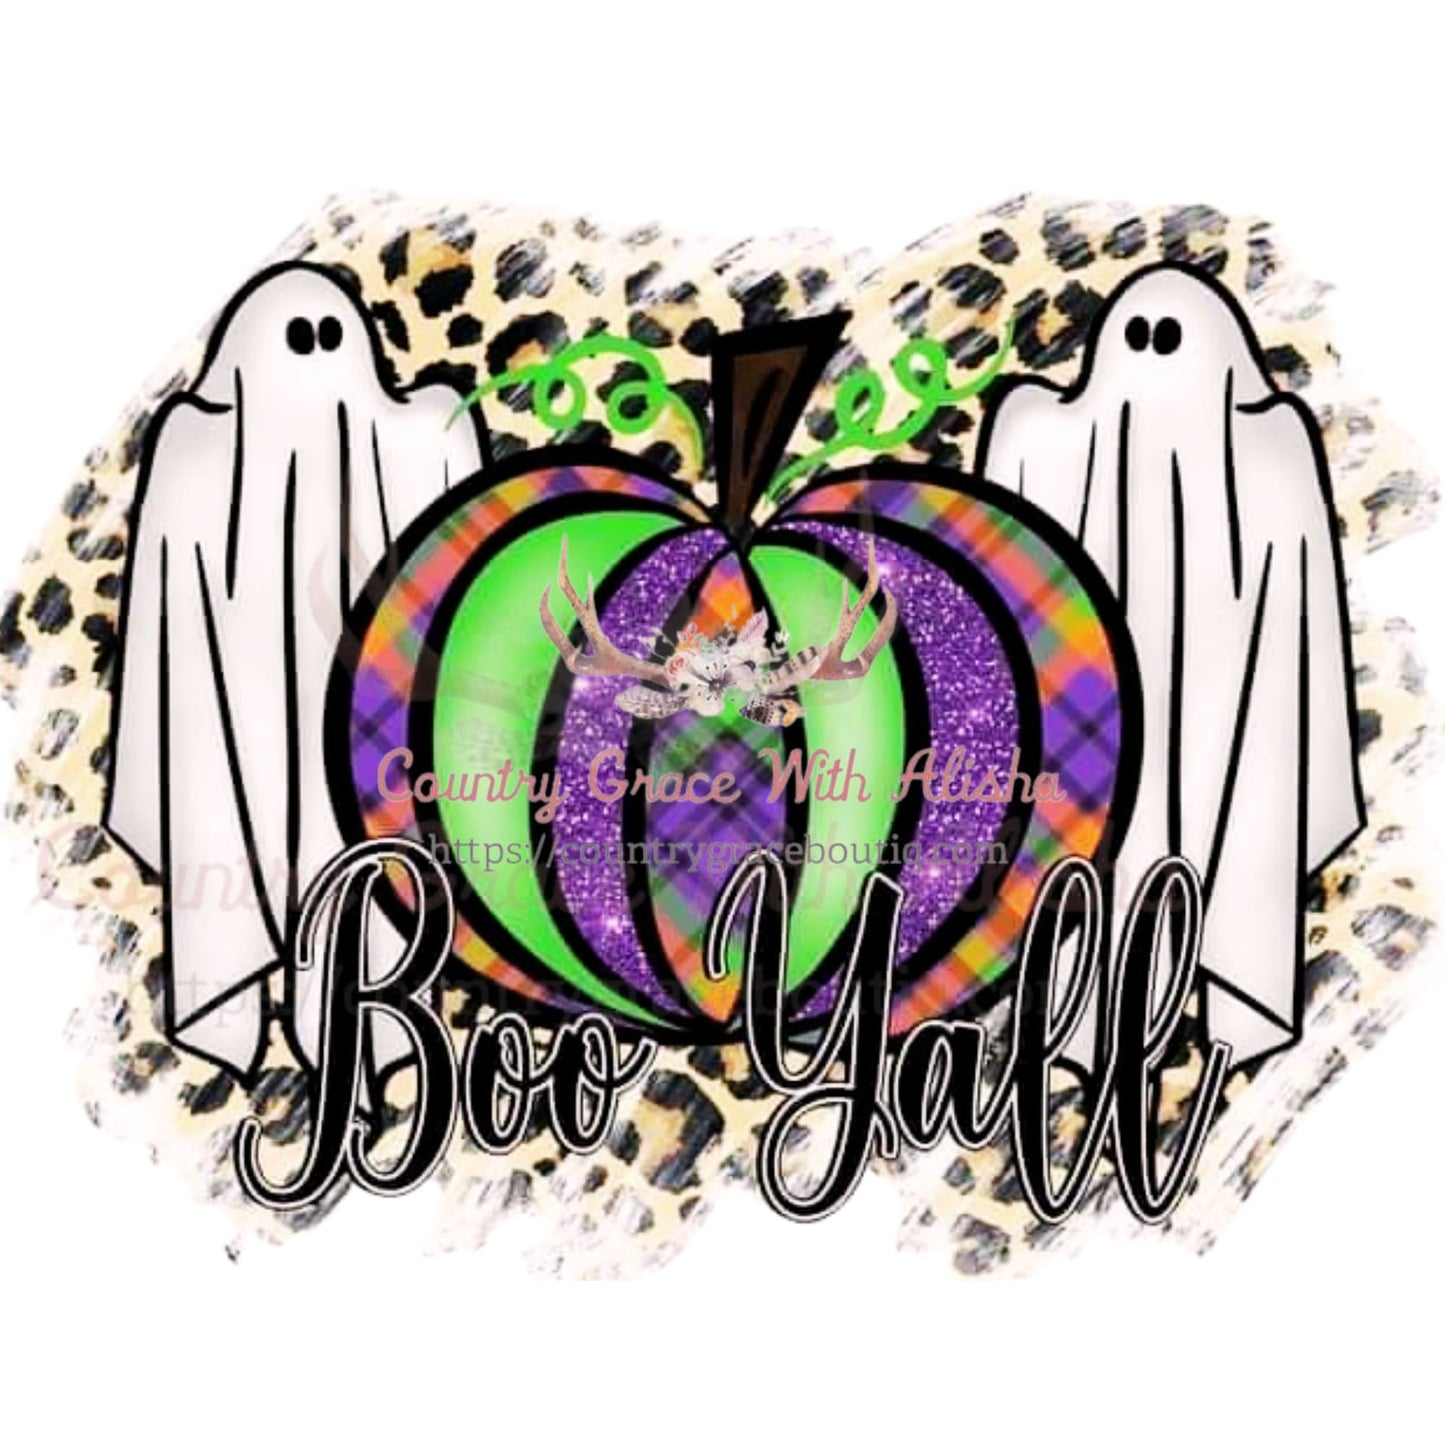 Boo Yall Ghost Sublimation Transfer - Sub $1.50 Country 